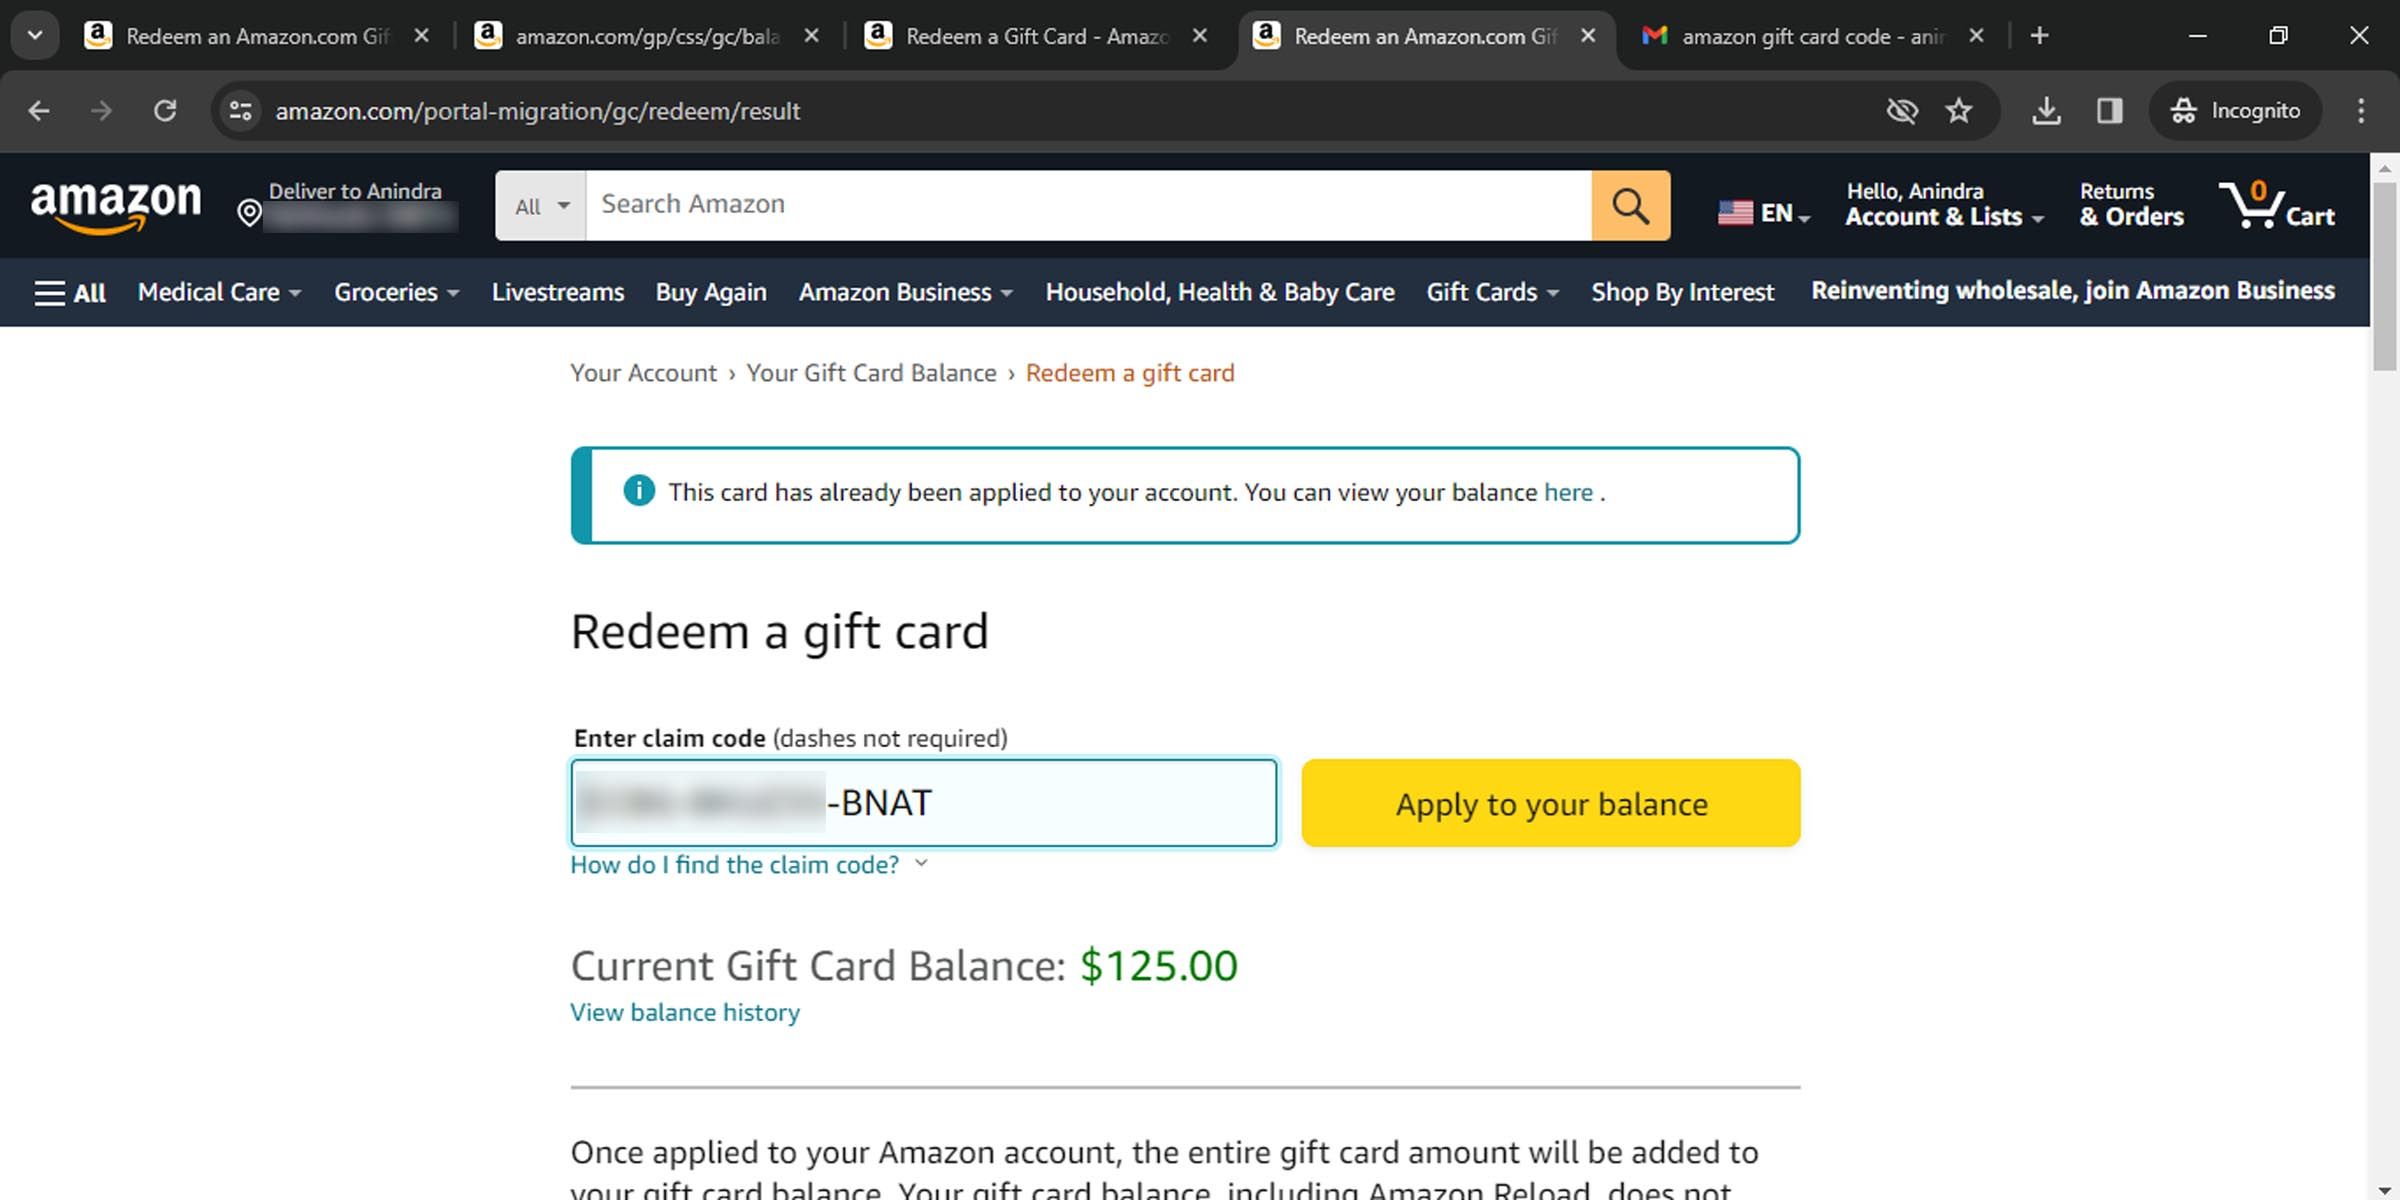 You cannot re-use an Amazon gift card code